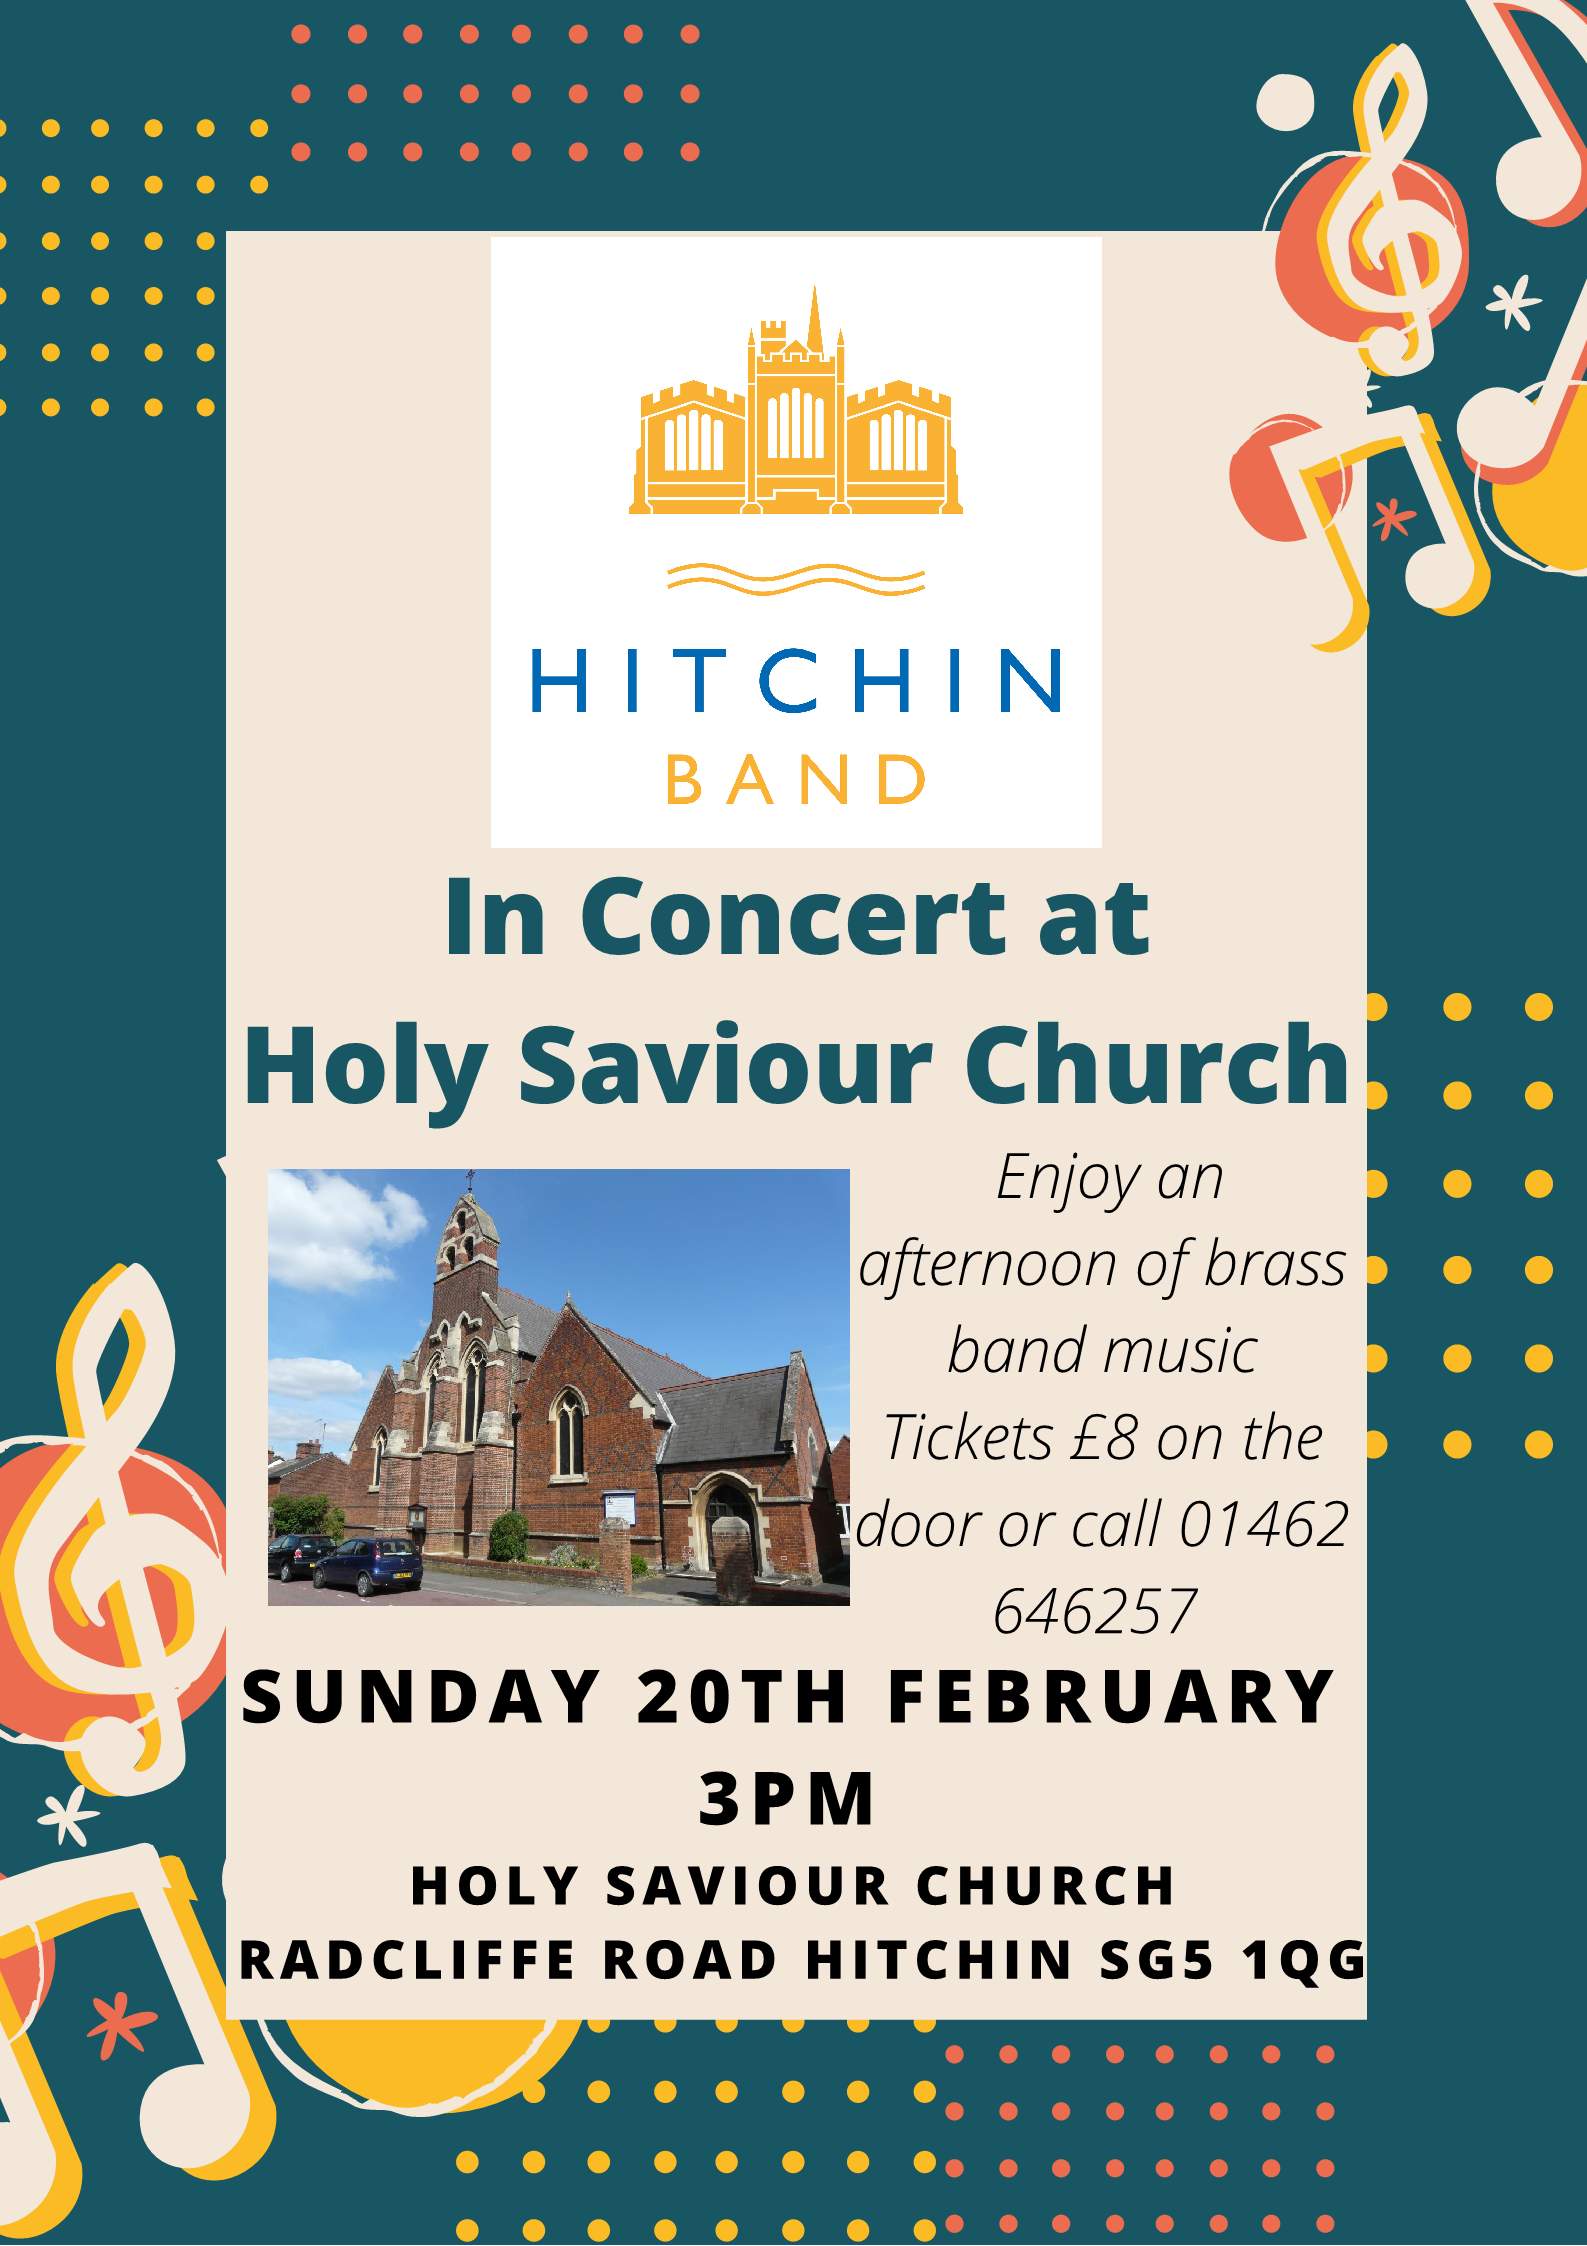 Hitchin Band in concert, 20th February 2022 3.00pm